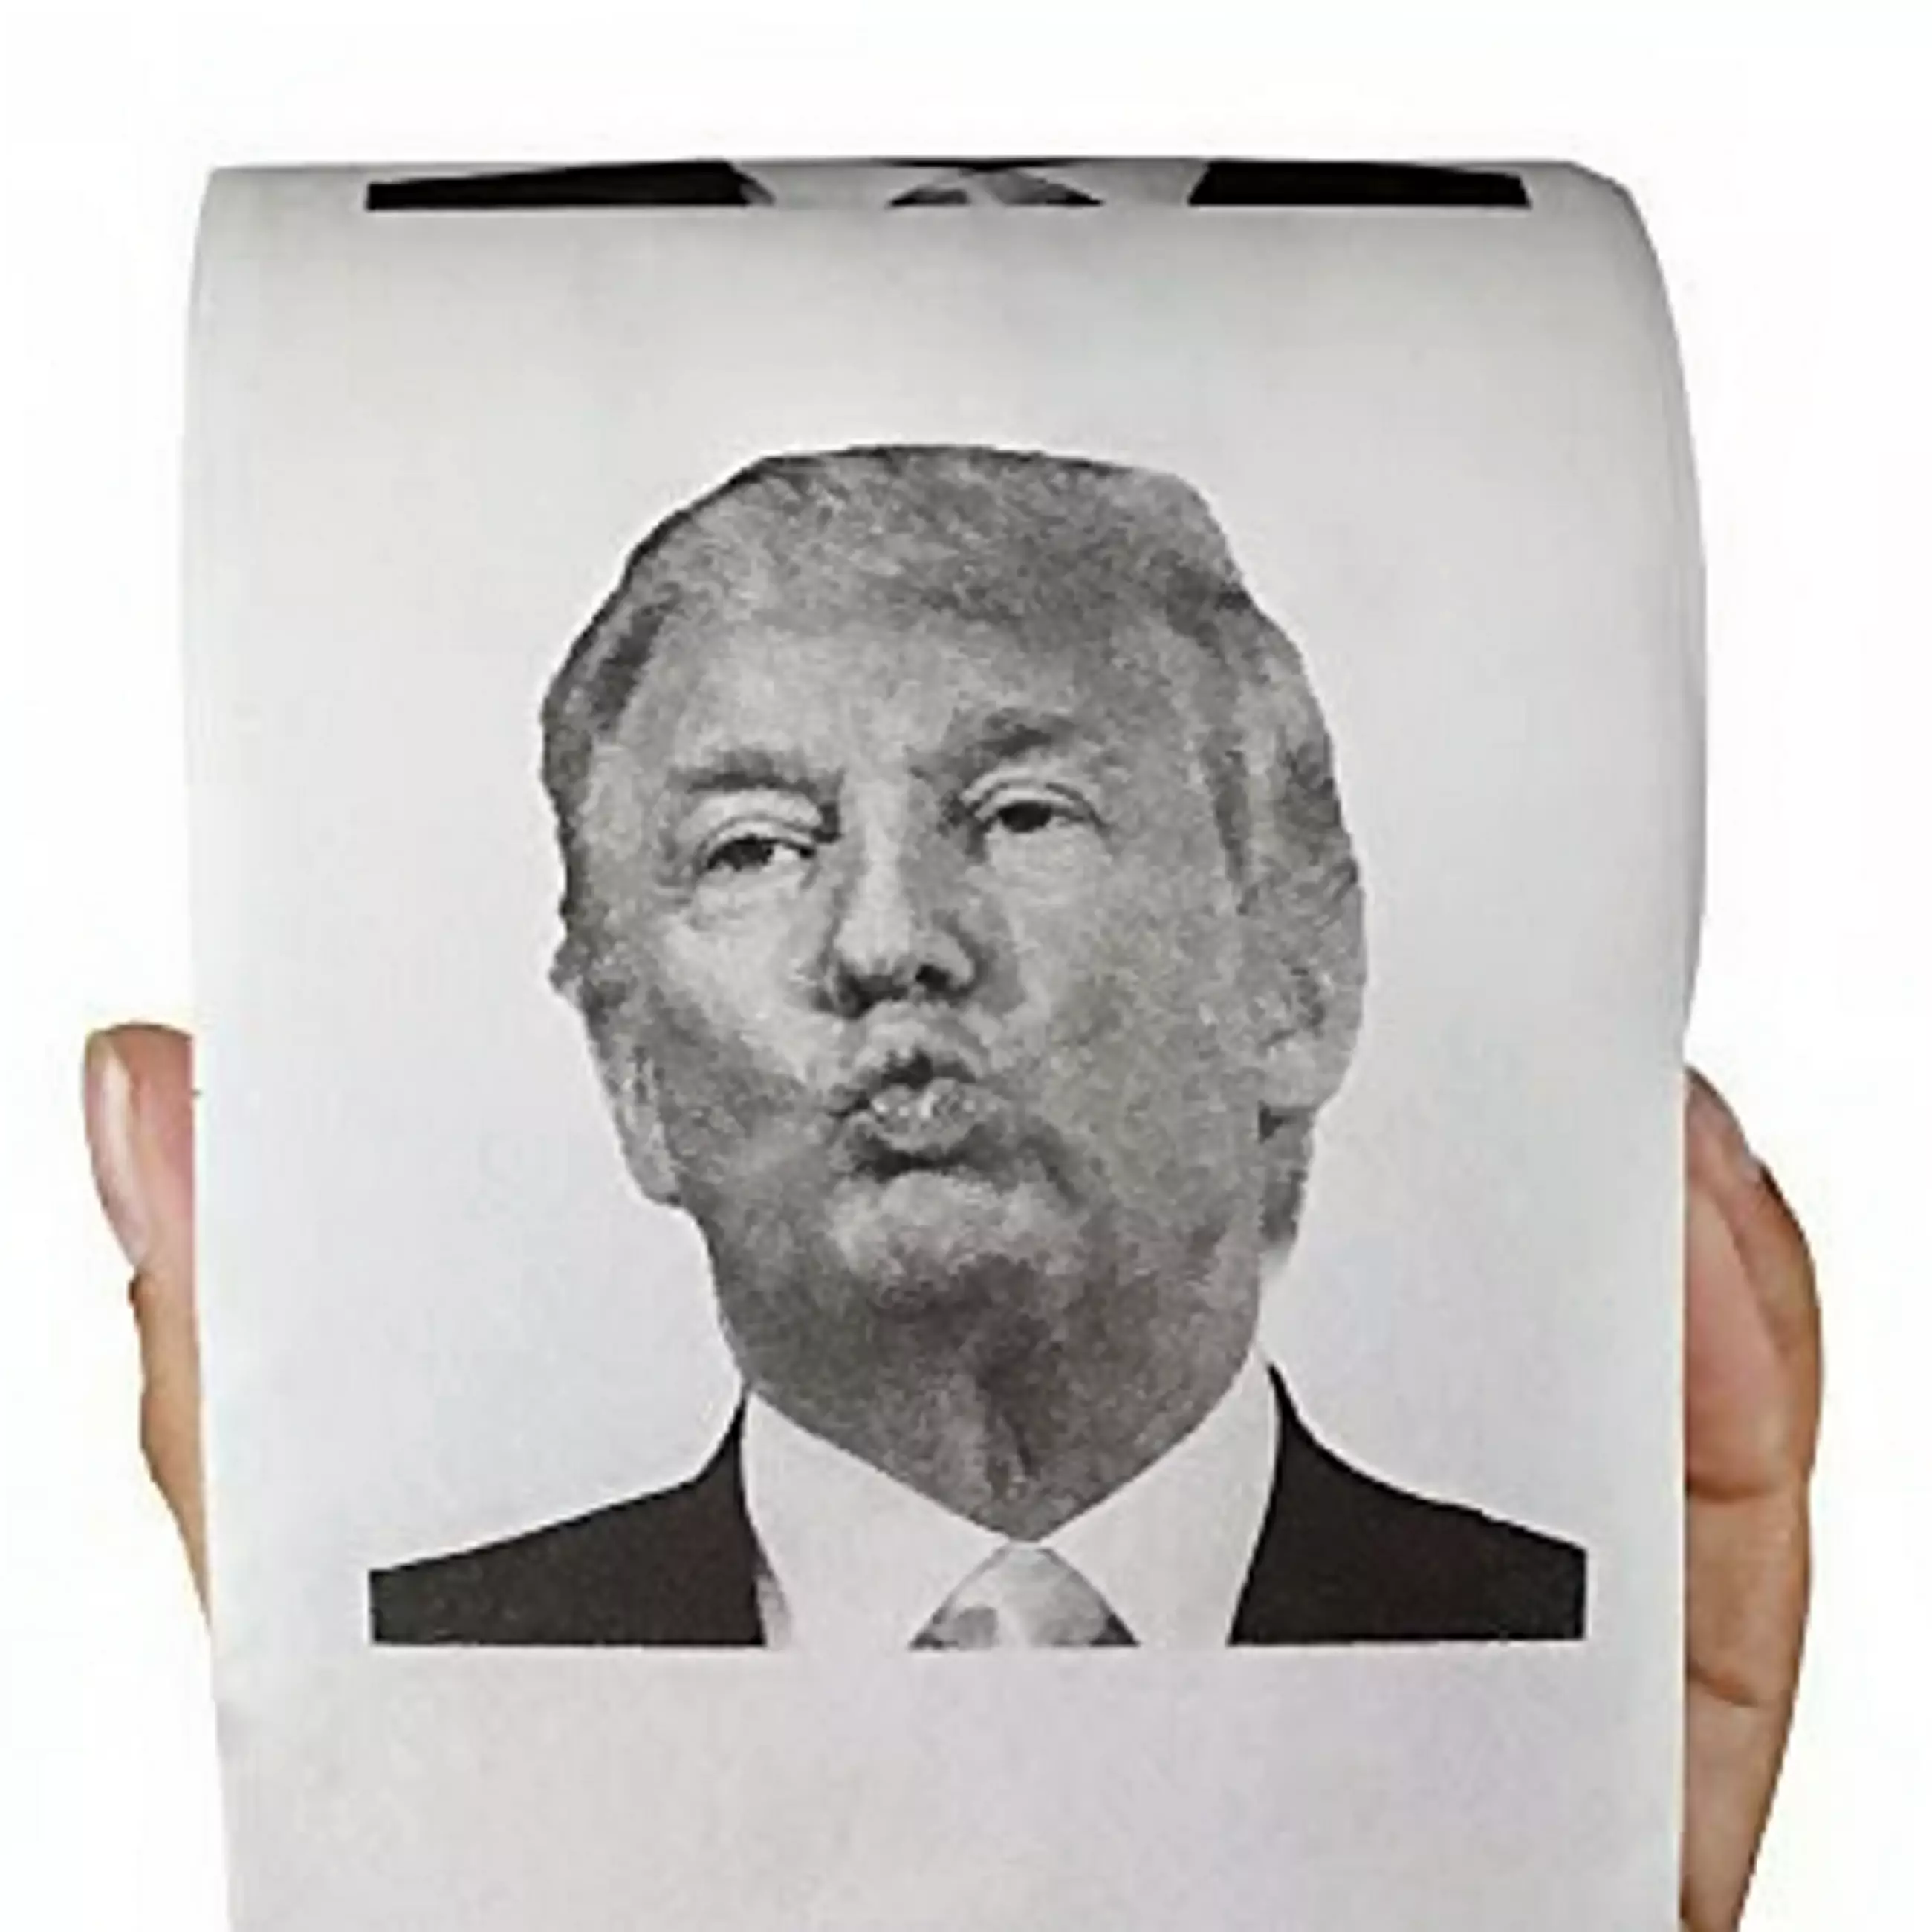 This Man Is Selling Donald Trump Toilet Paper From A Shopping Trolley